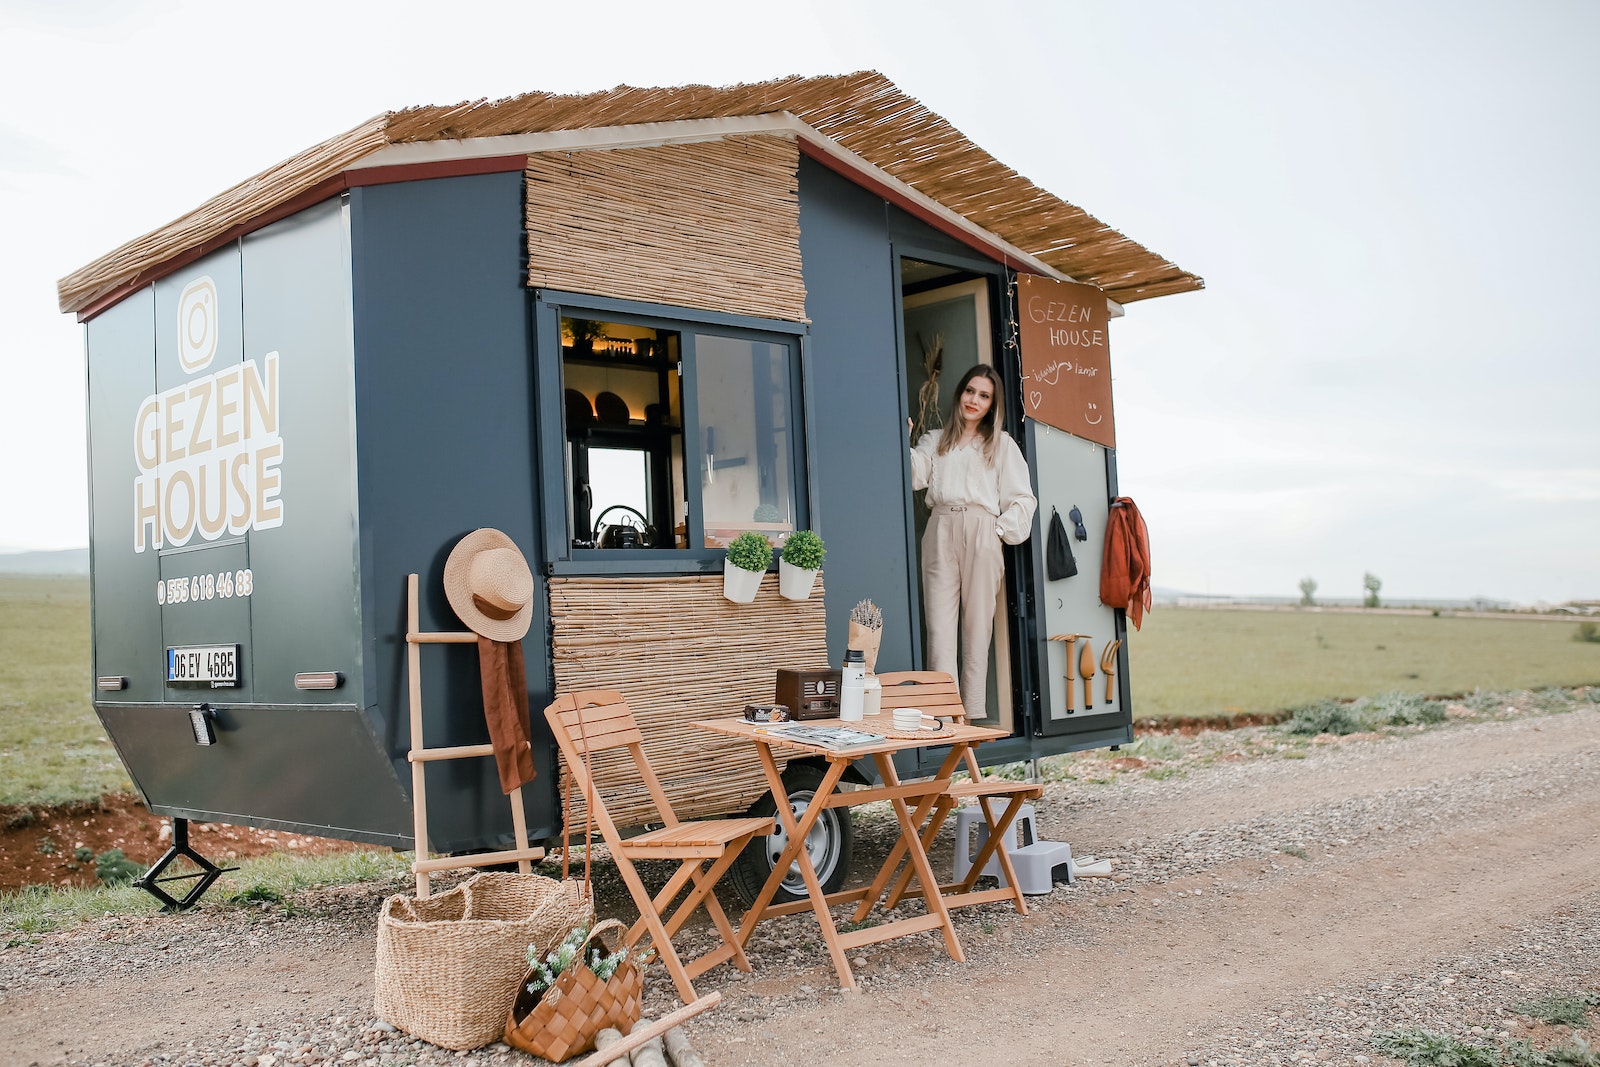 Woman Standing in a Trailer Converted to a House on Wheels